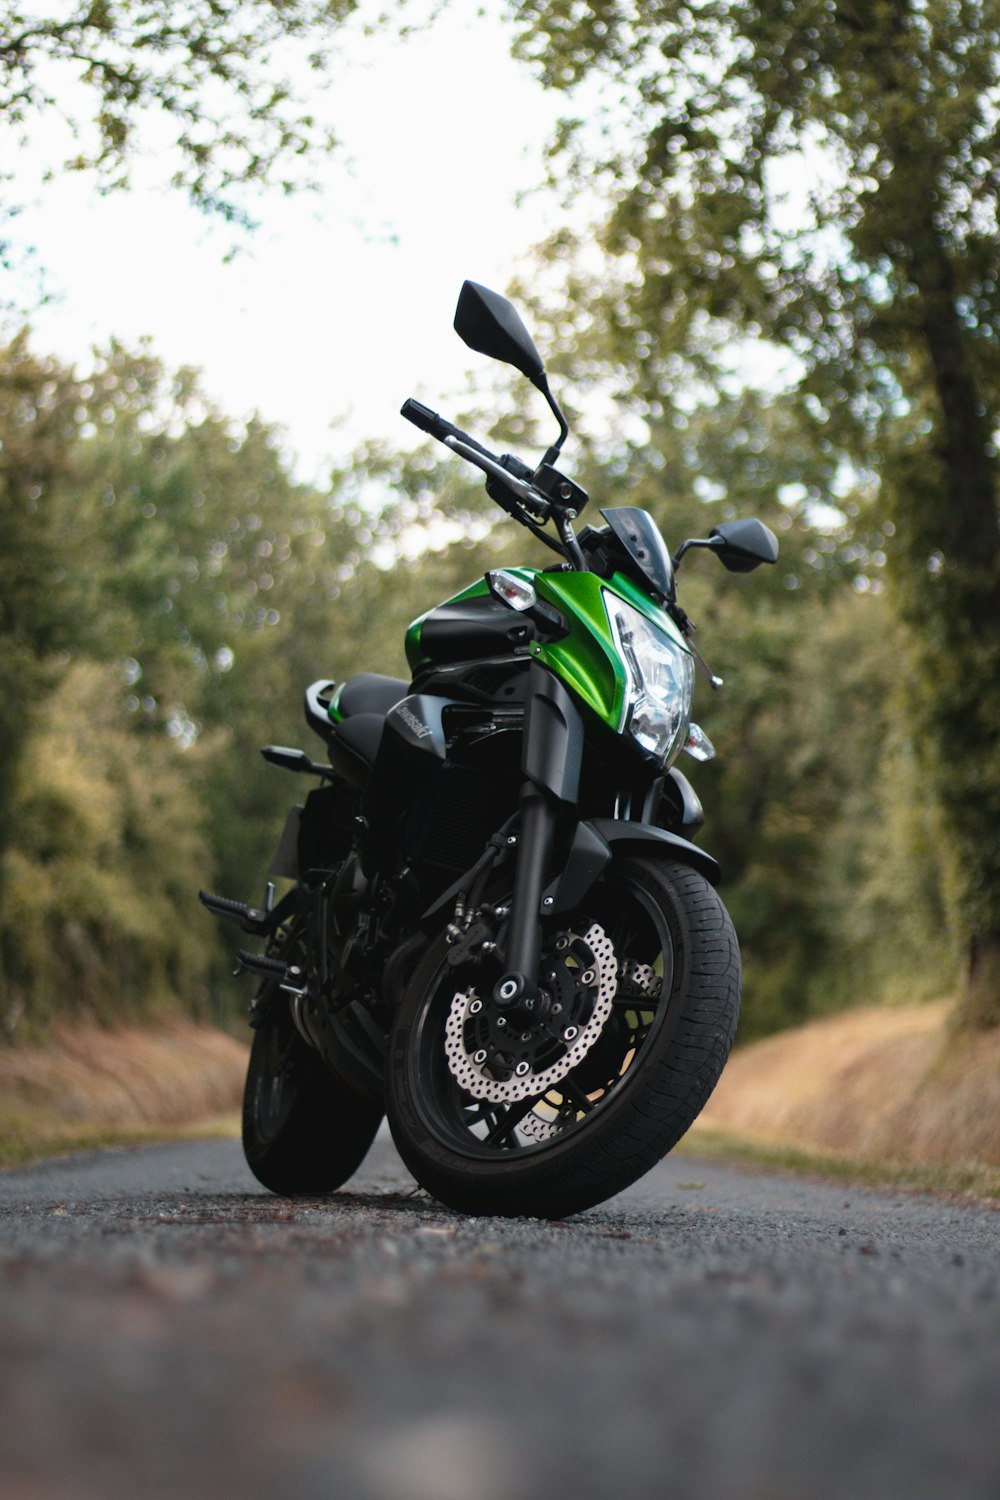 black and green motorcycle on road during daytime